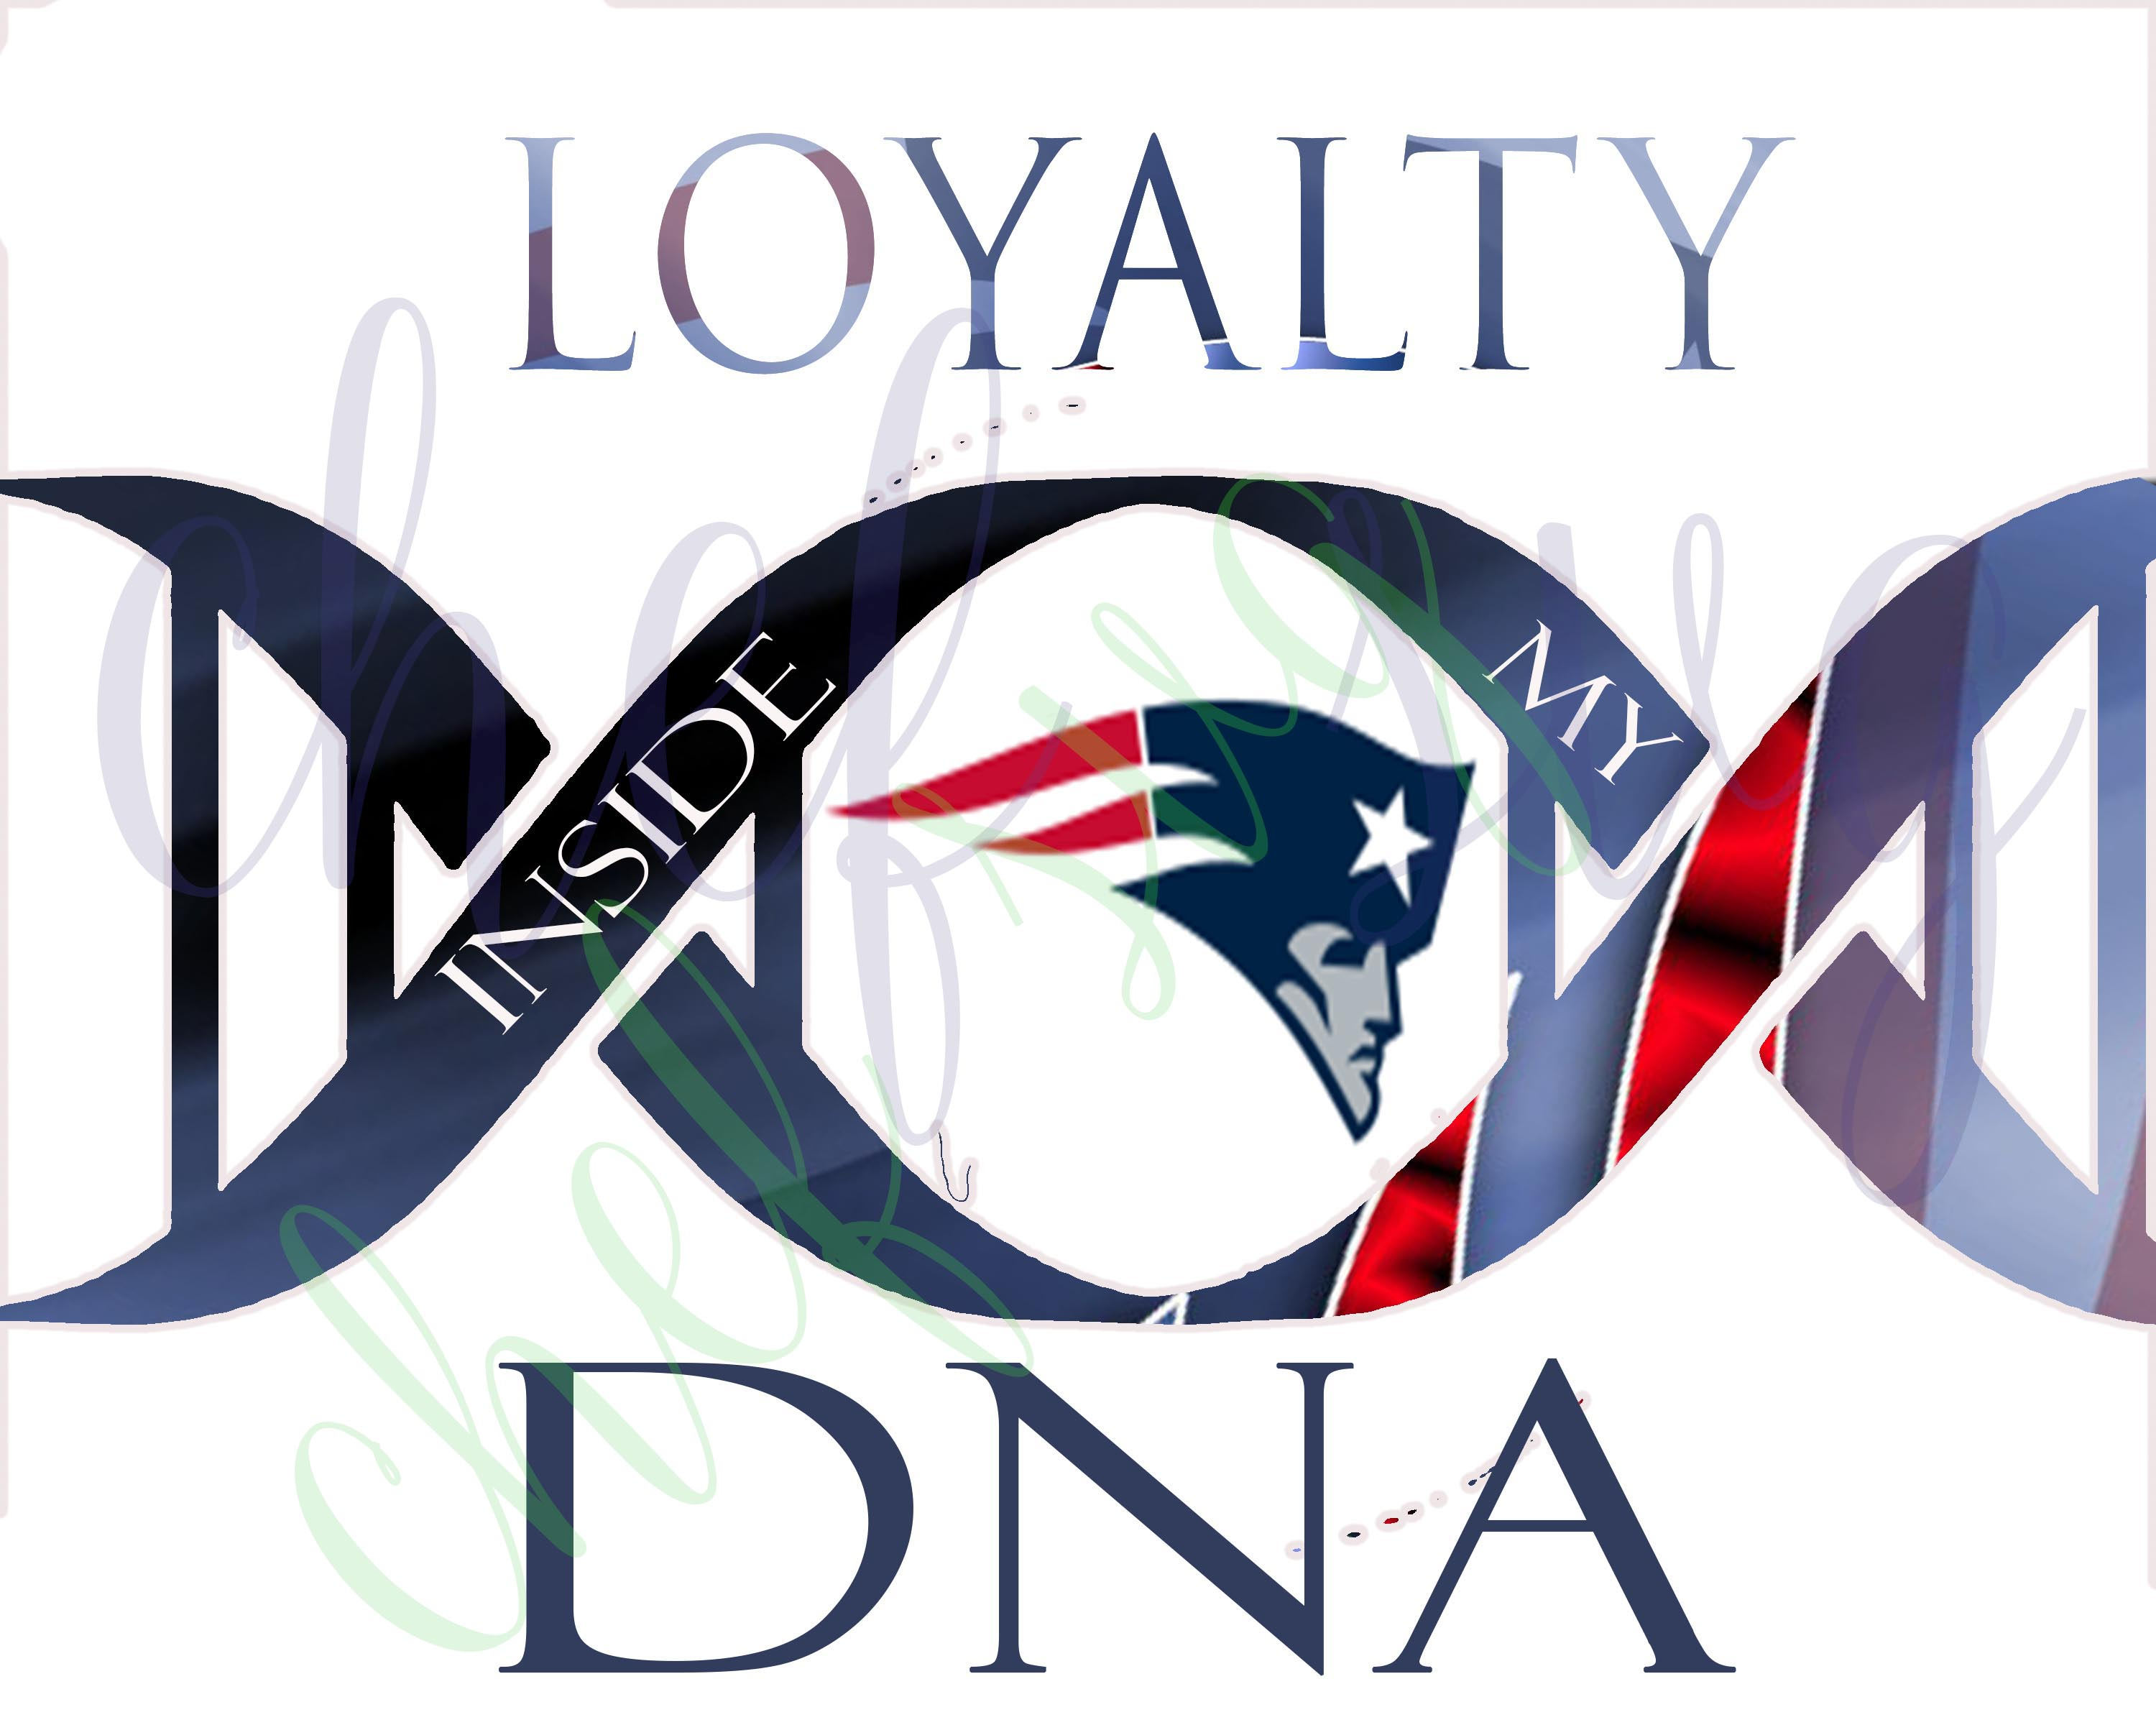 Download New England Patriots Clipart at GetDrawings.com | Free for personal use New England Patriots ...